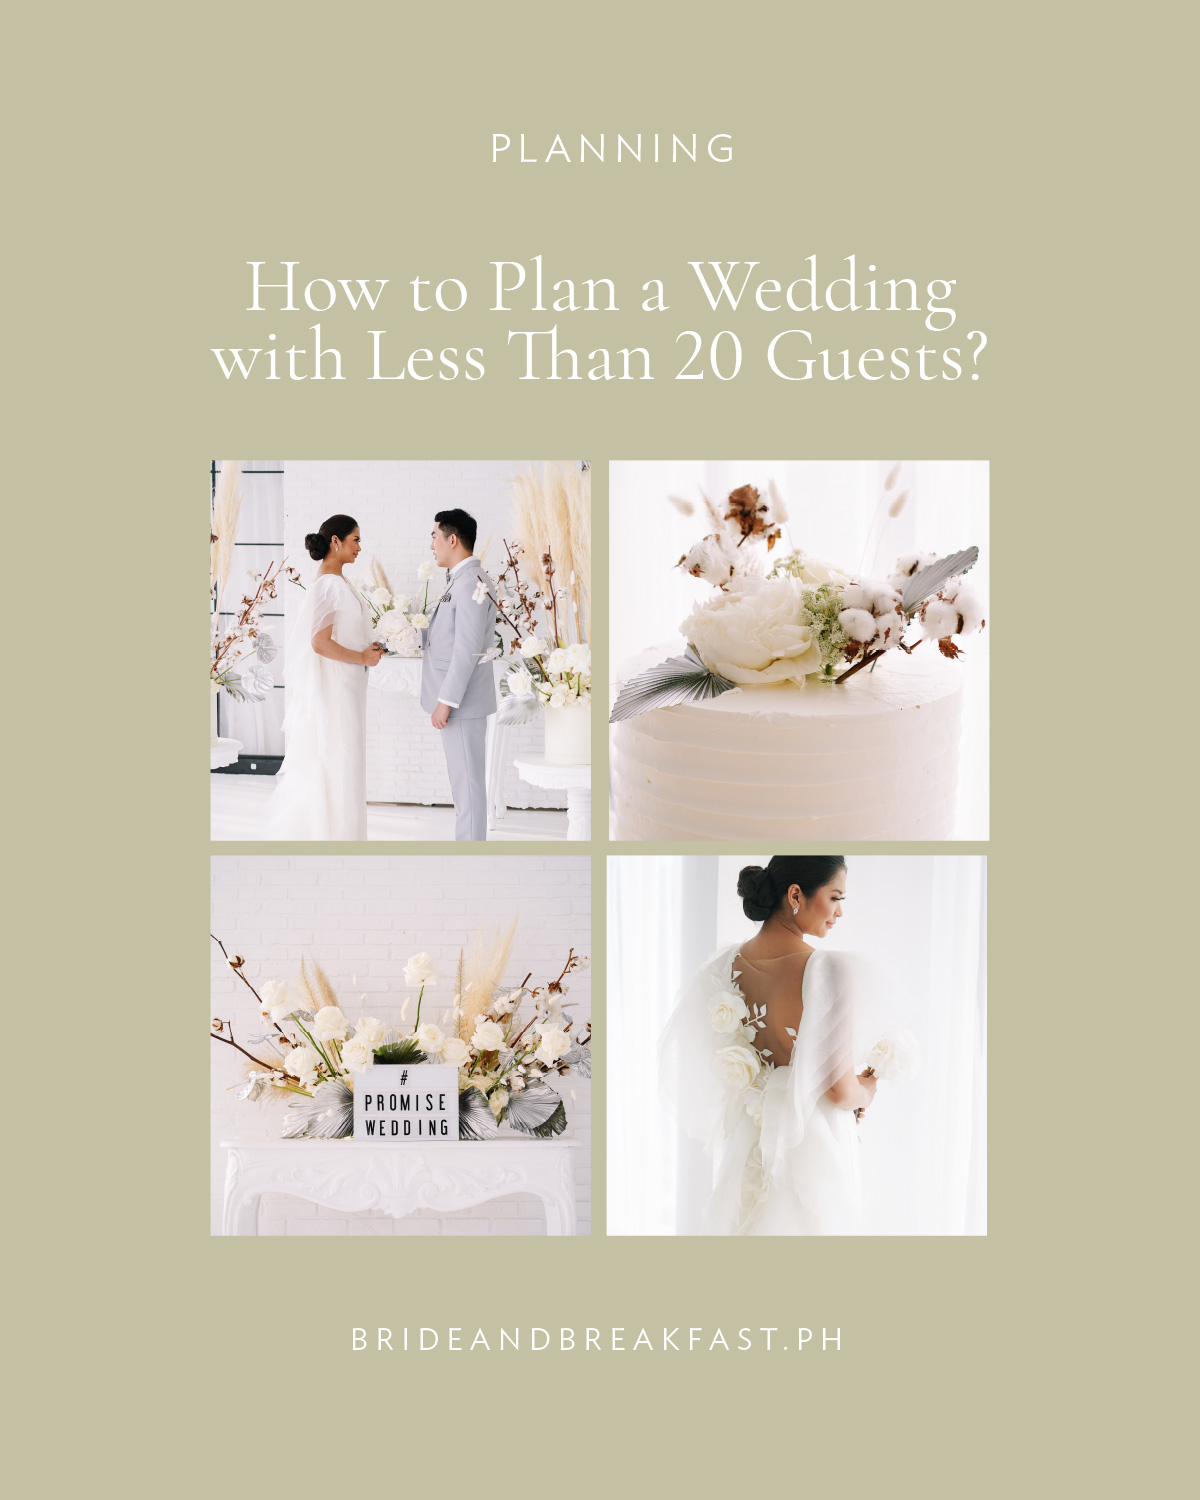 How to plan a wedding with less than 20 guests?